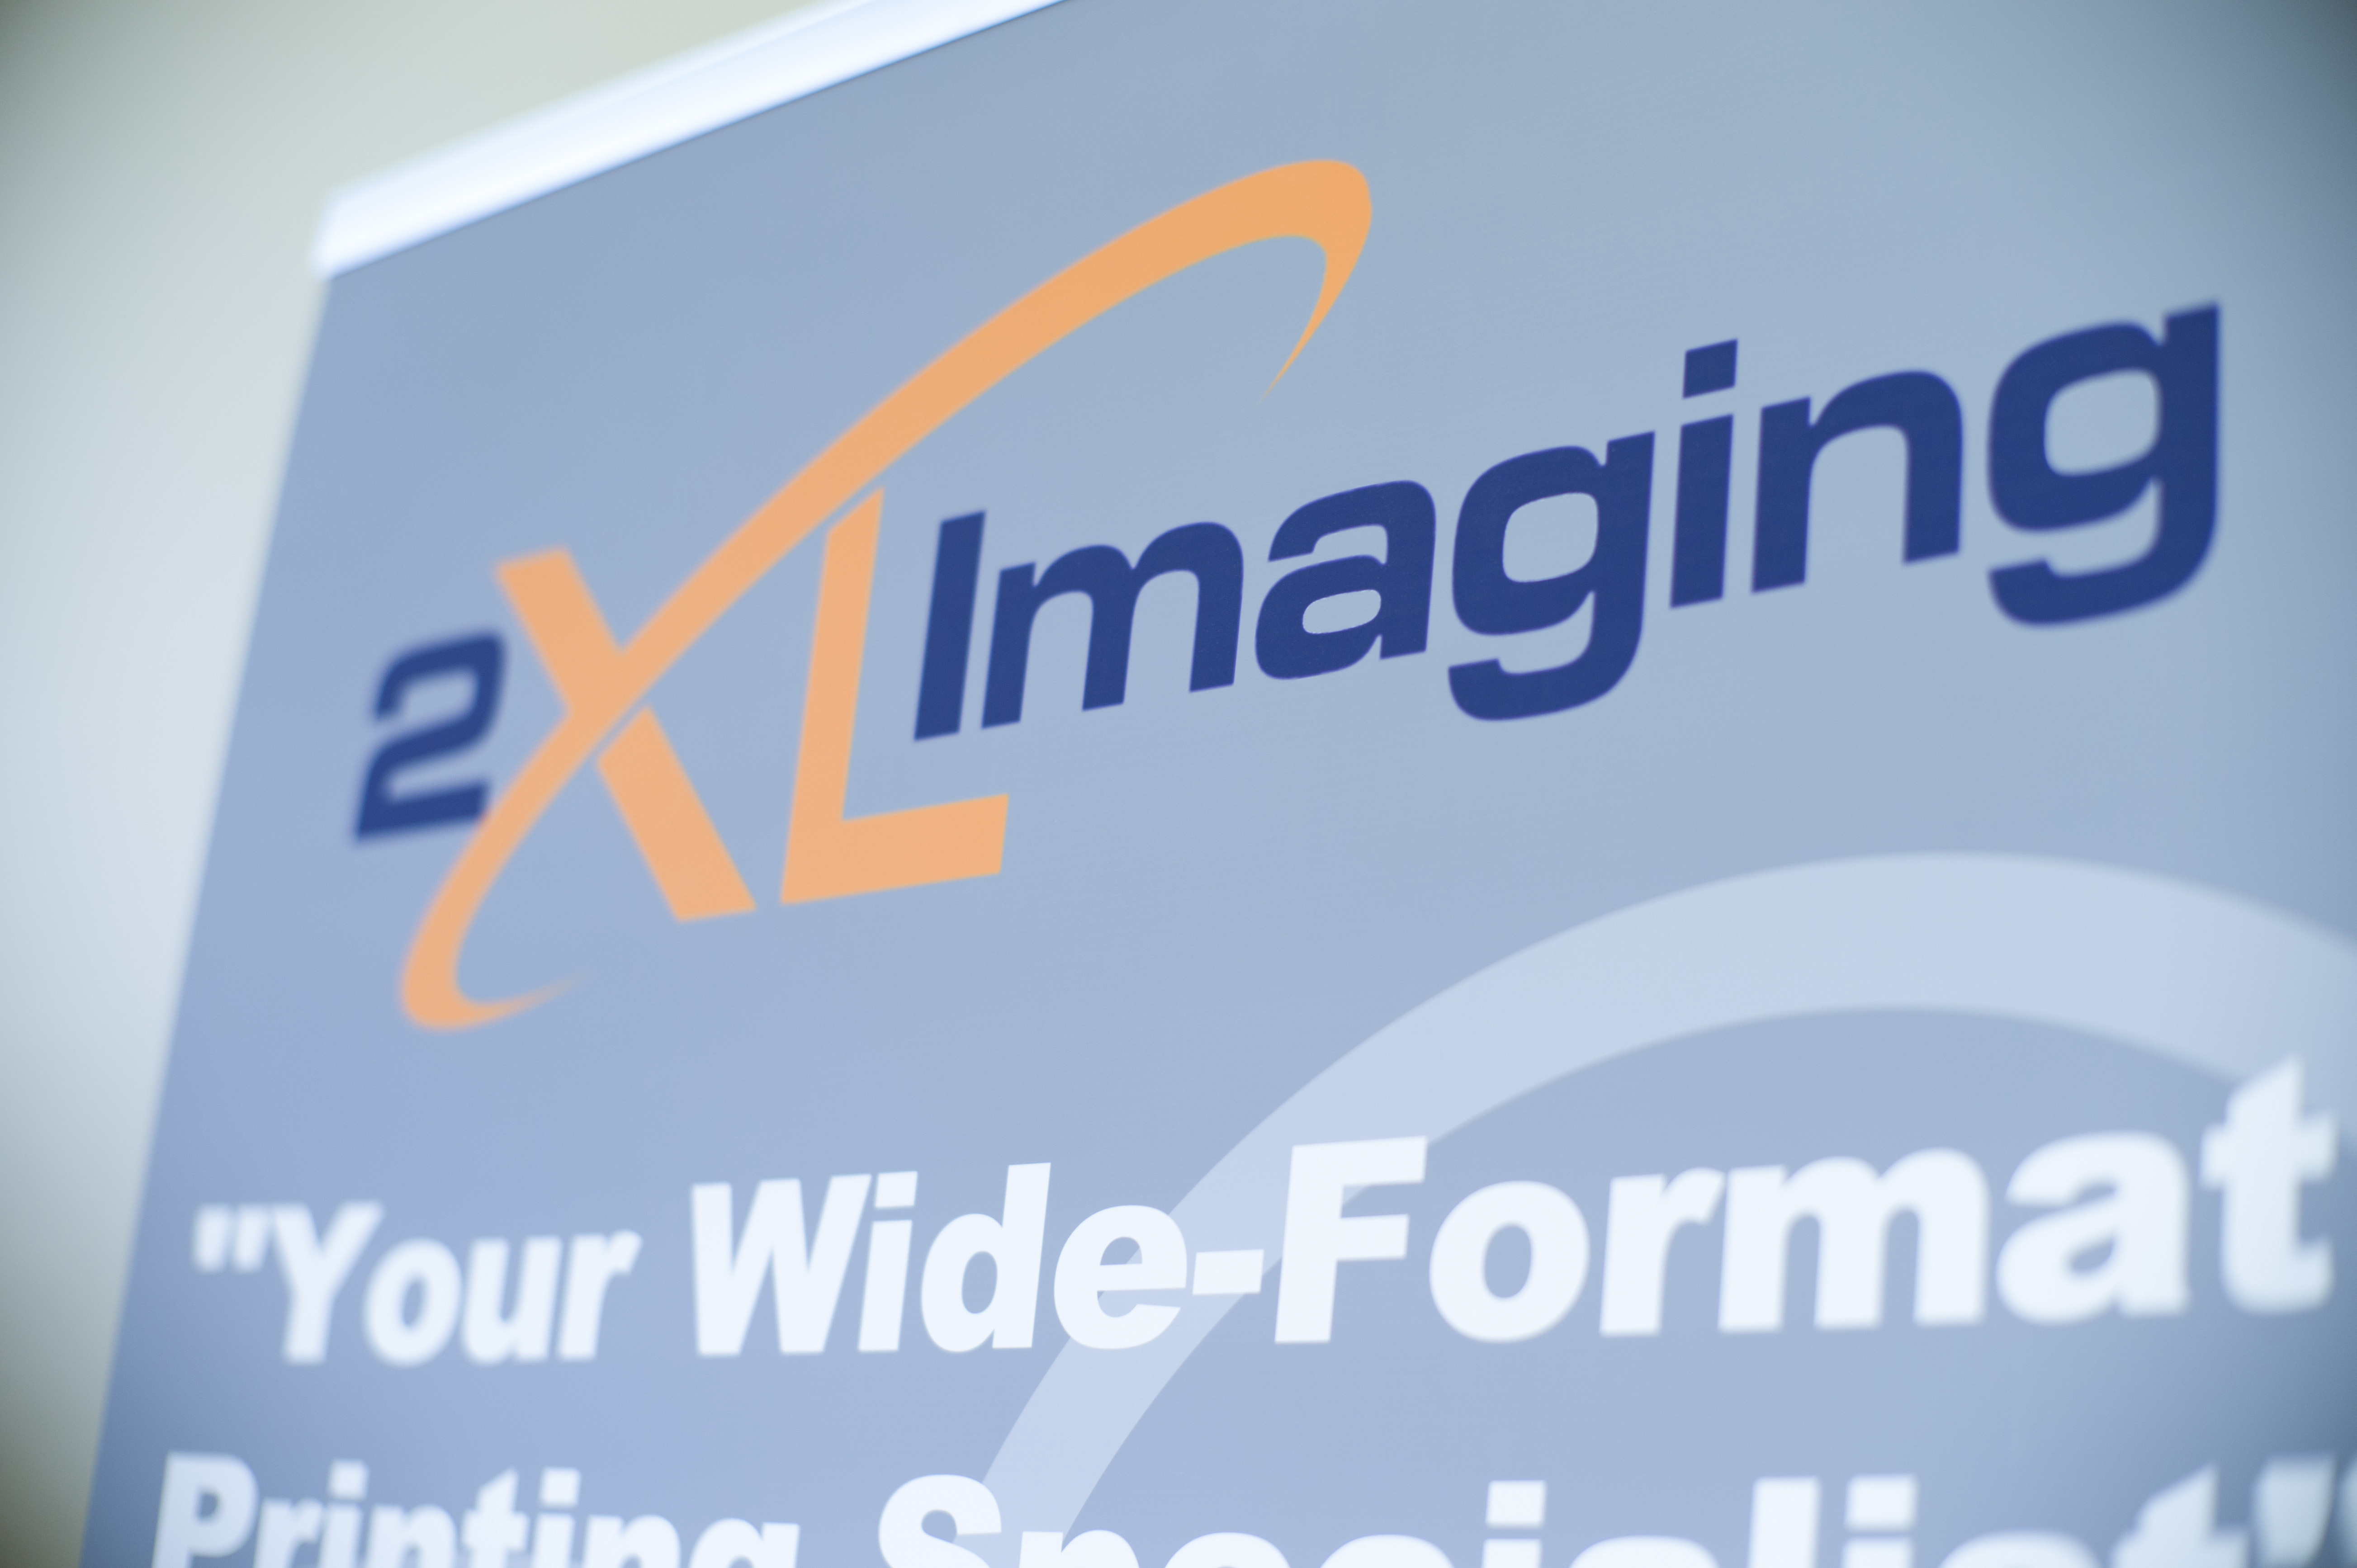 2XL Imaging of Union, NJ, is one of the top wide-format printers in the region, specializing in large retail displays.